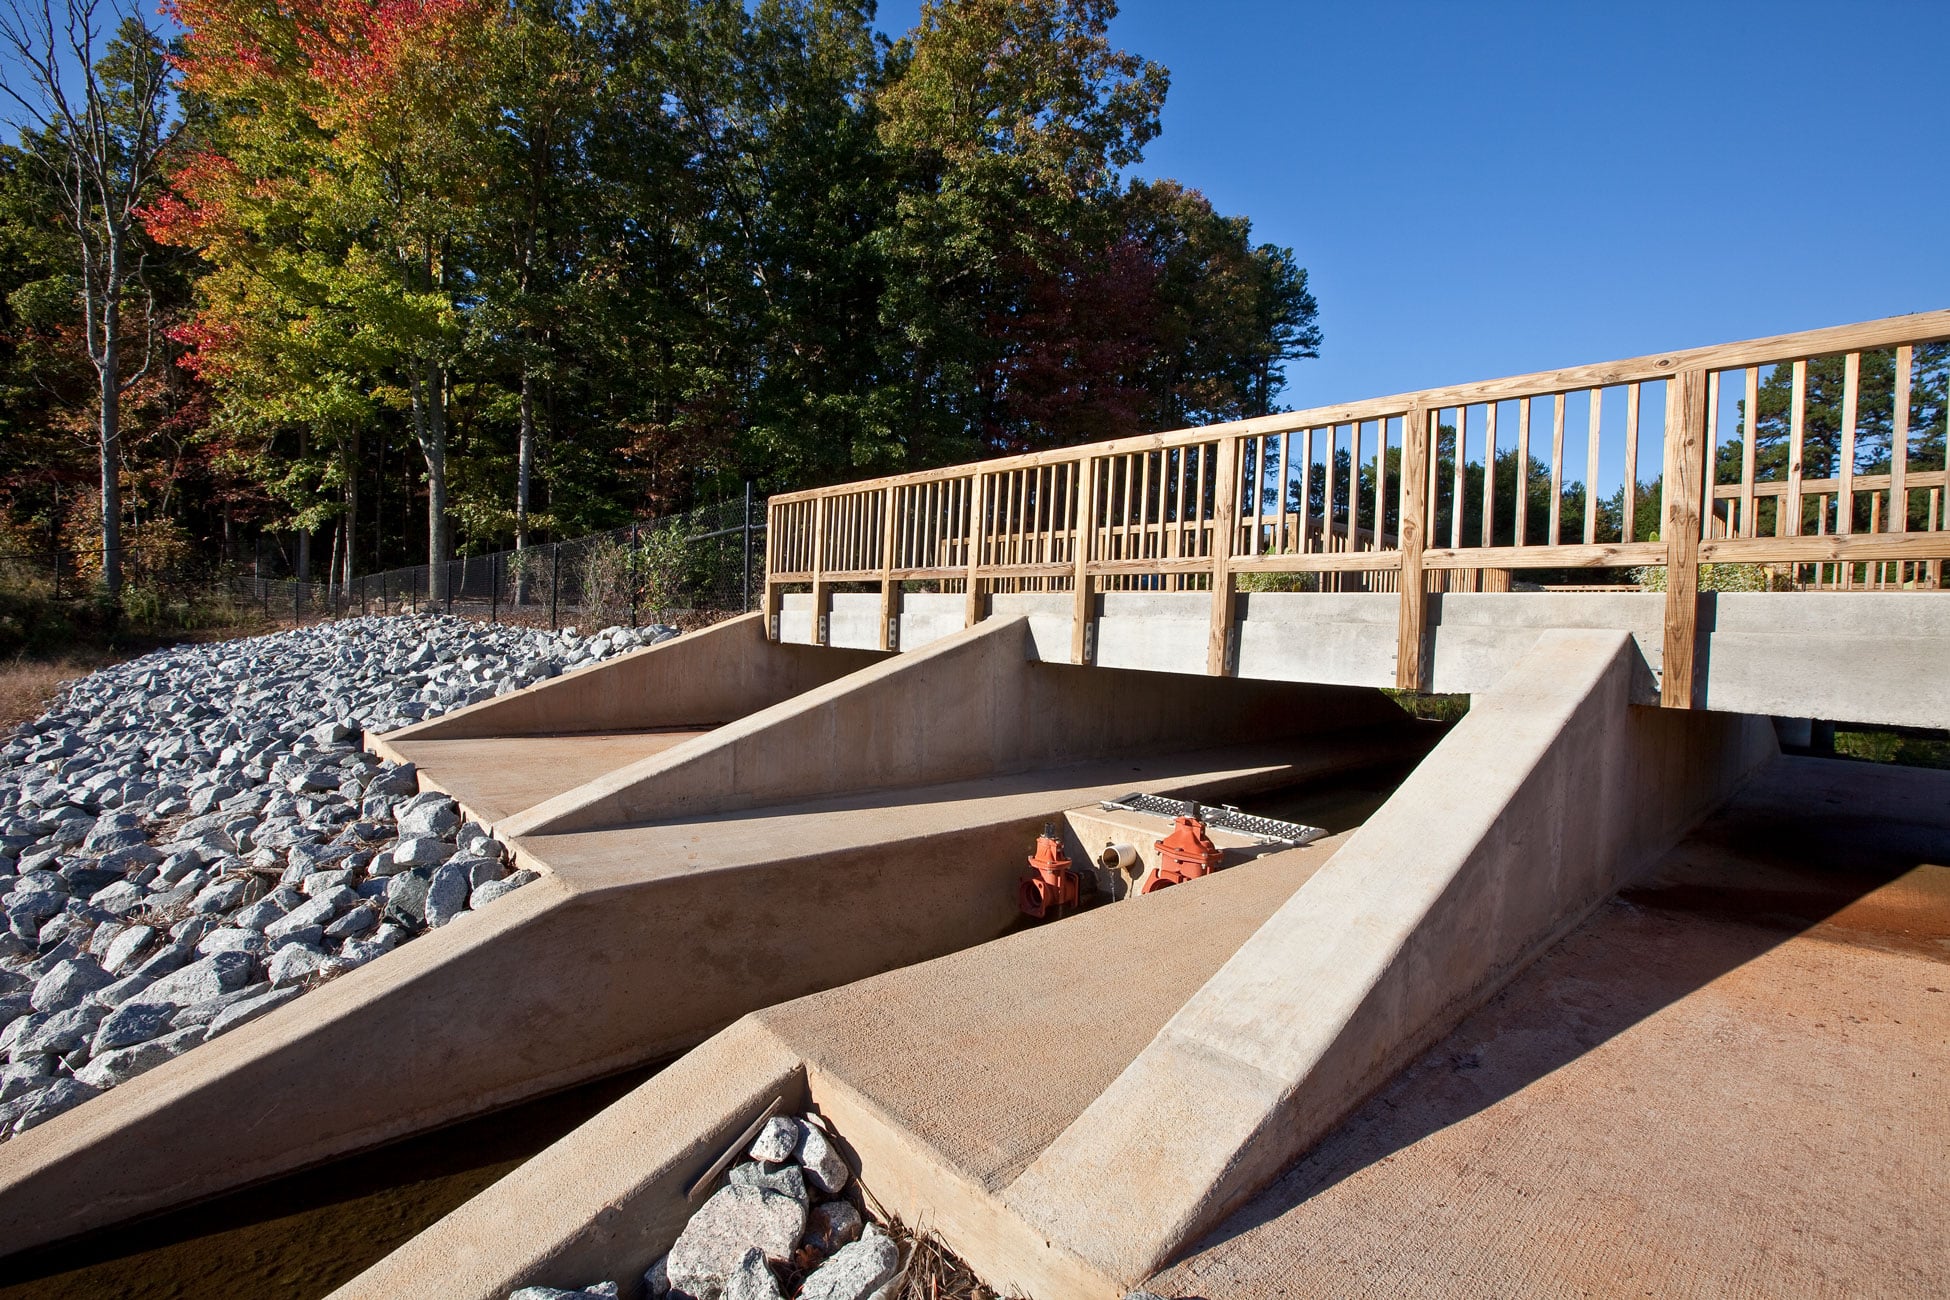 Kimley-Horn provided stormwater consulting services for a wetland retrofit to treat the runoff for a parking area at the North Carolina Zoological Park.